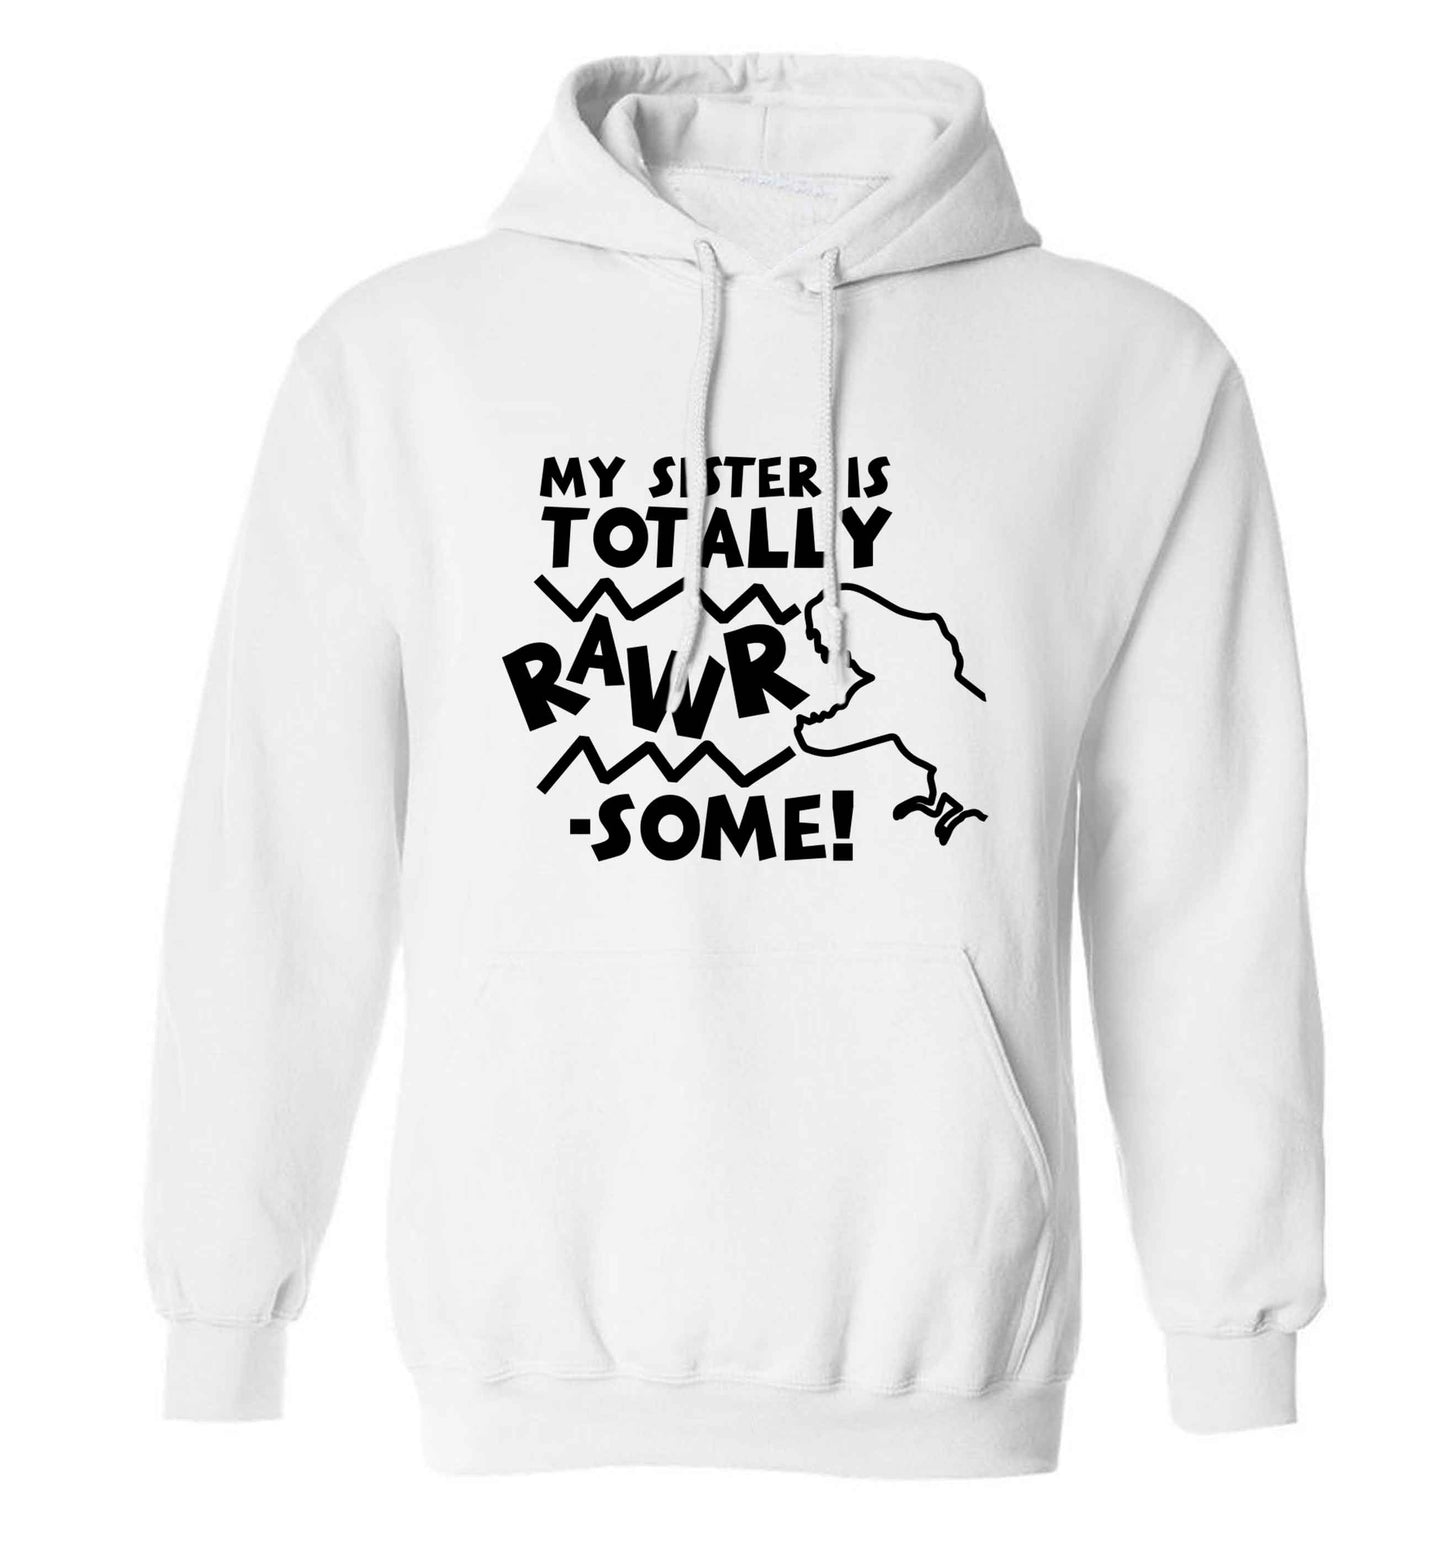 My sister is totally rawrsome adults unisex white hoodie 2XL